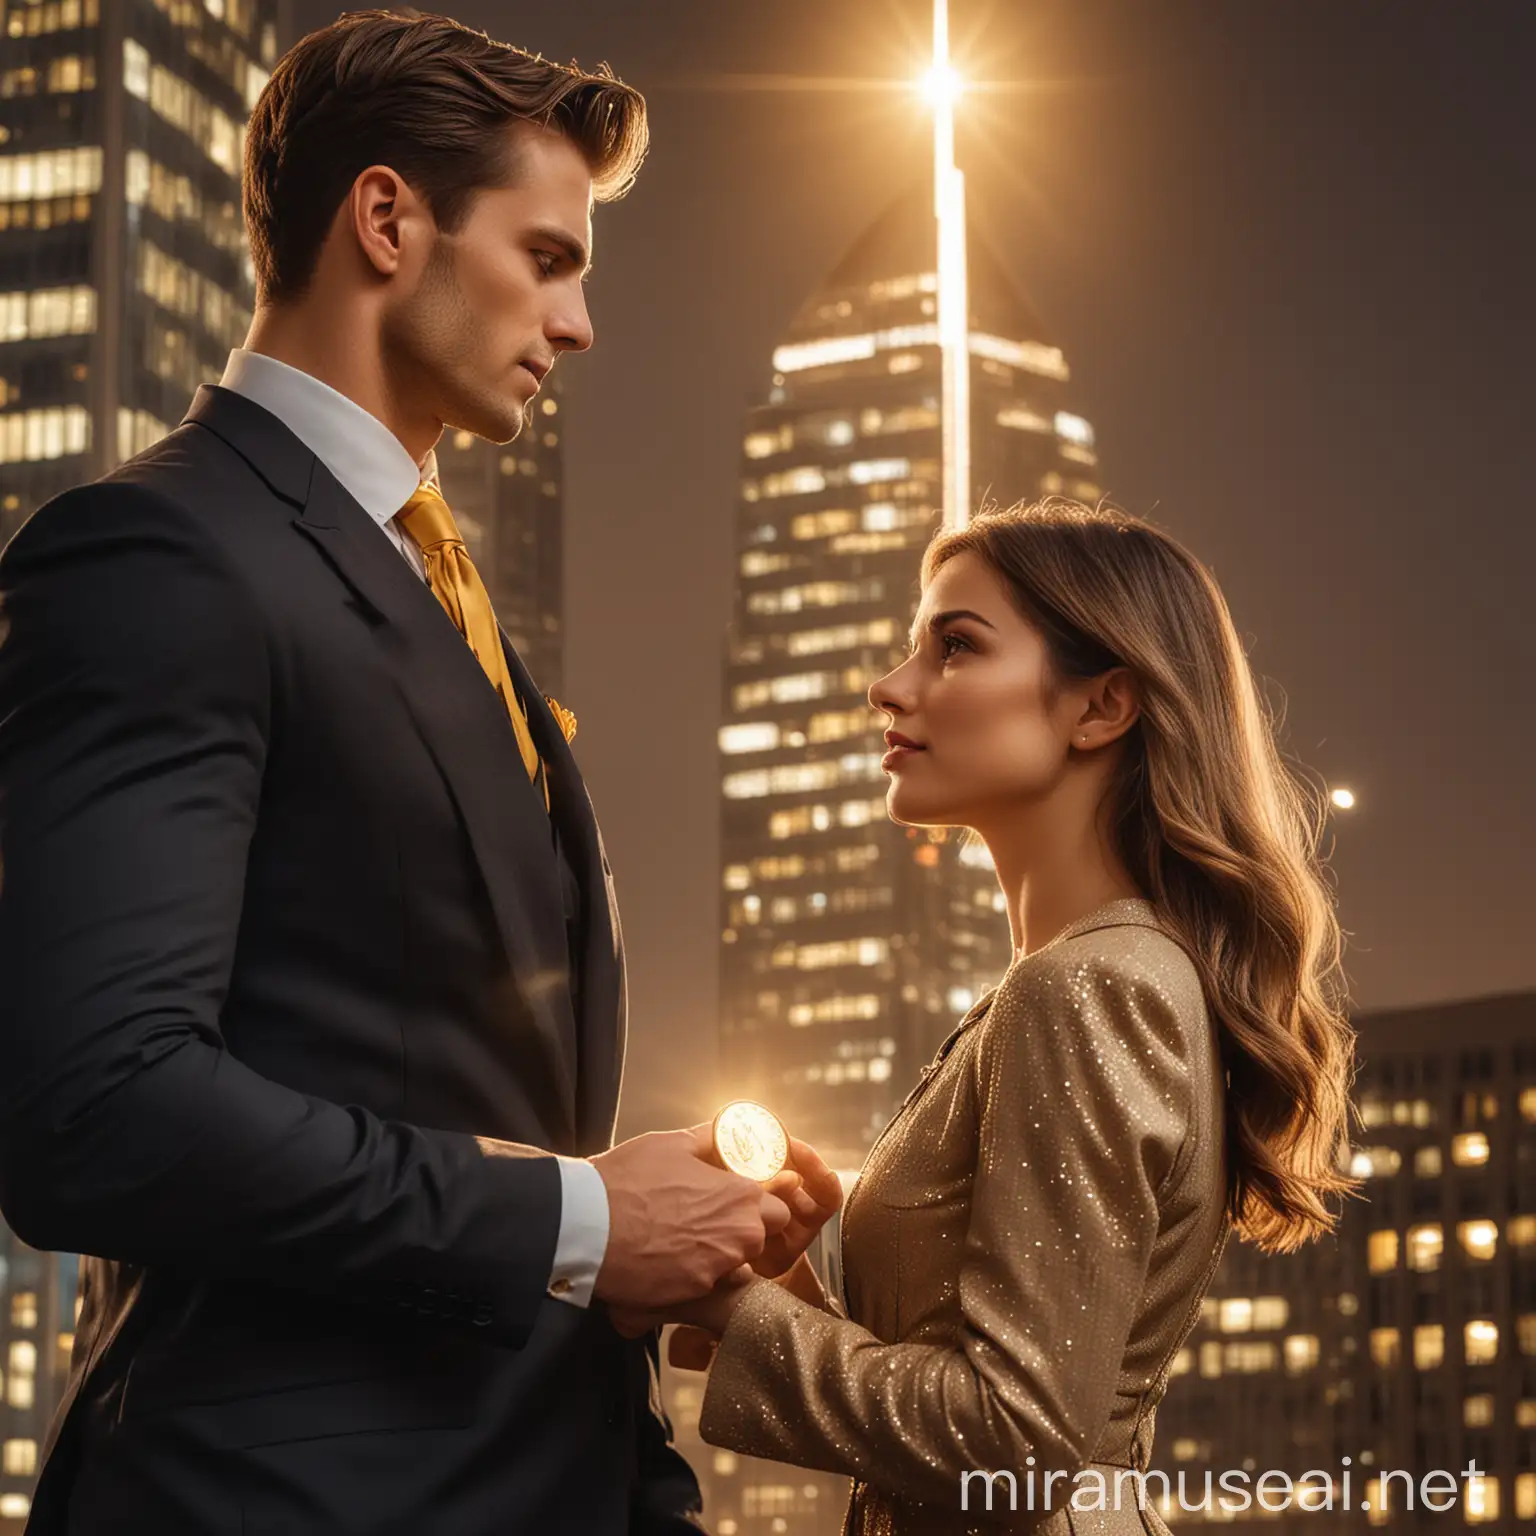 Elegant Couple with Coin and Cityscape Backdrop